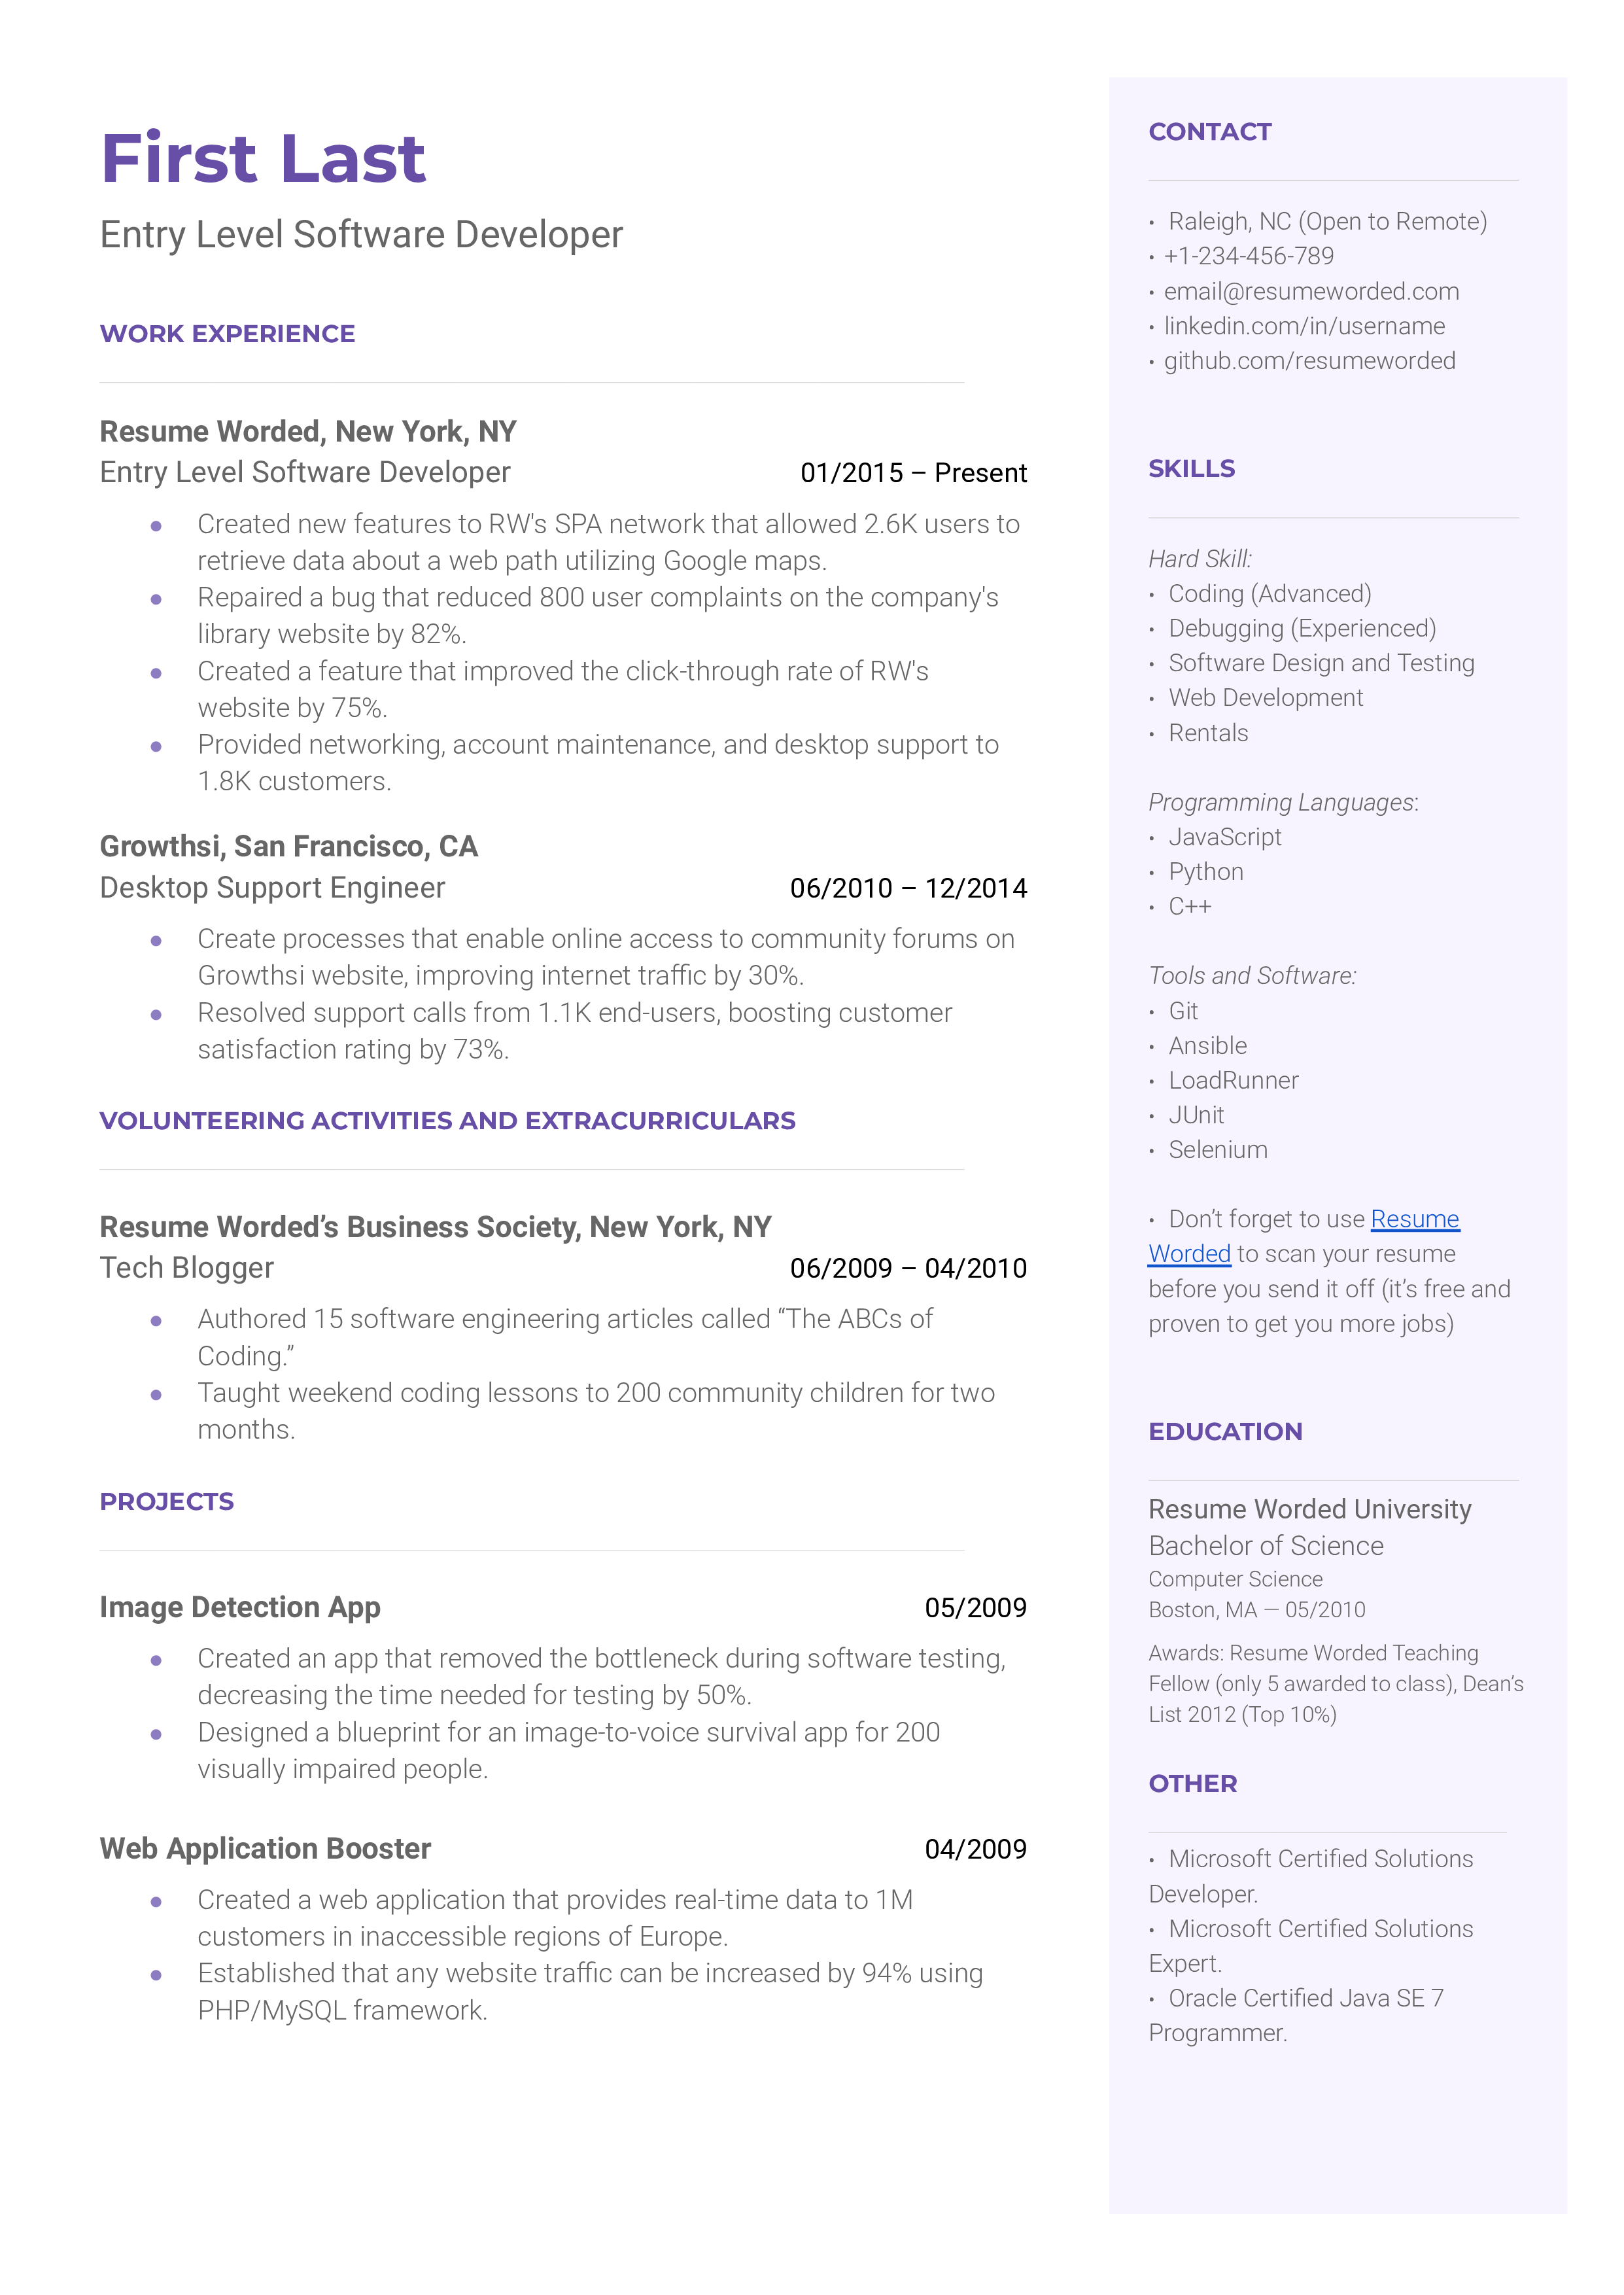 An Entry-Level Software Developer CV highlighting coding skills and projects.